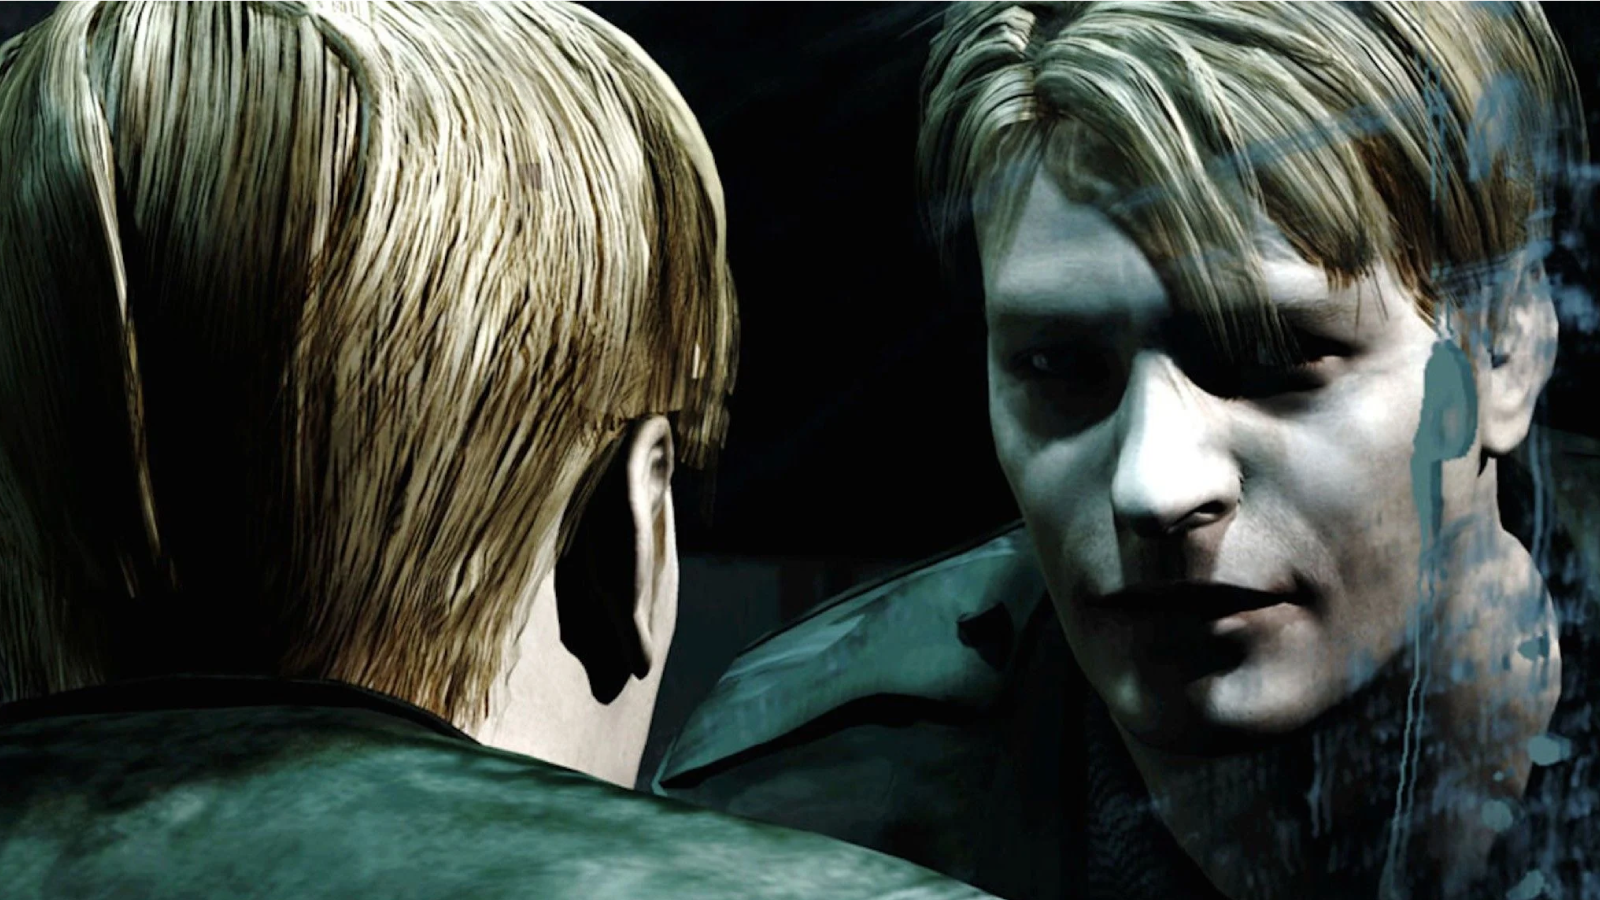 Image for Silent Hill 2 translator says giving credit for his work "is the right thing to do"